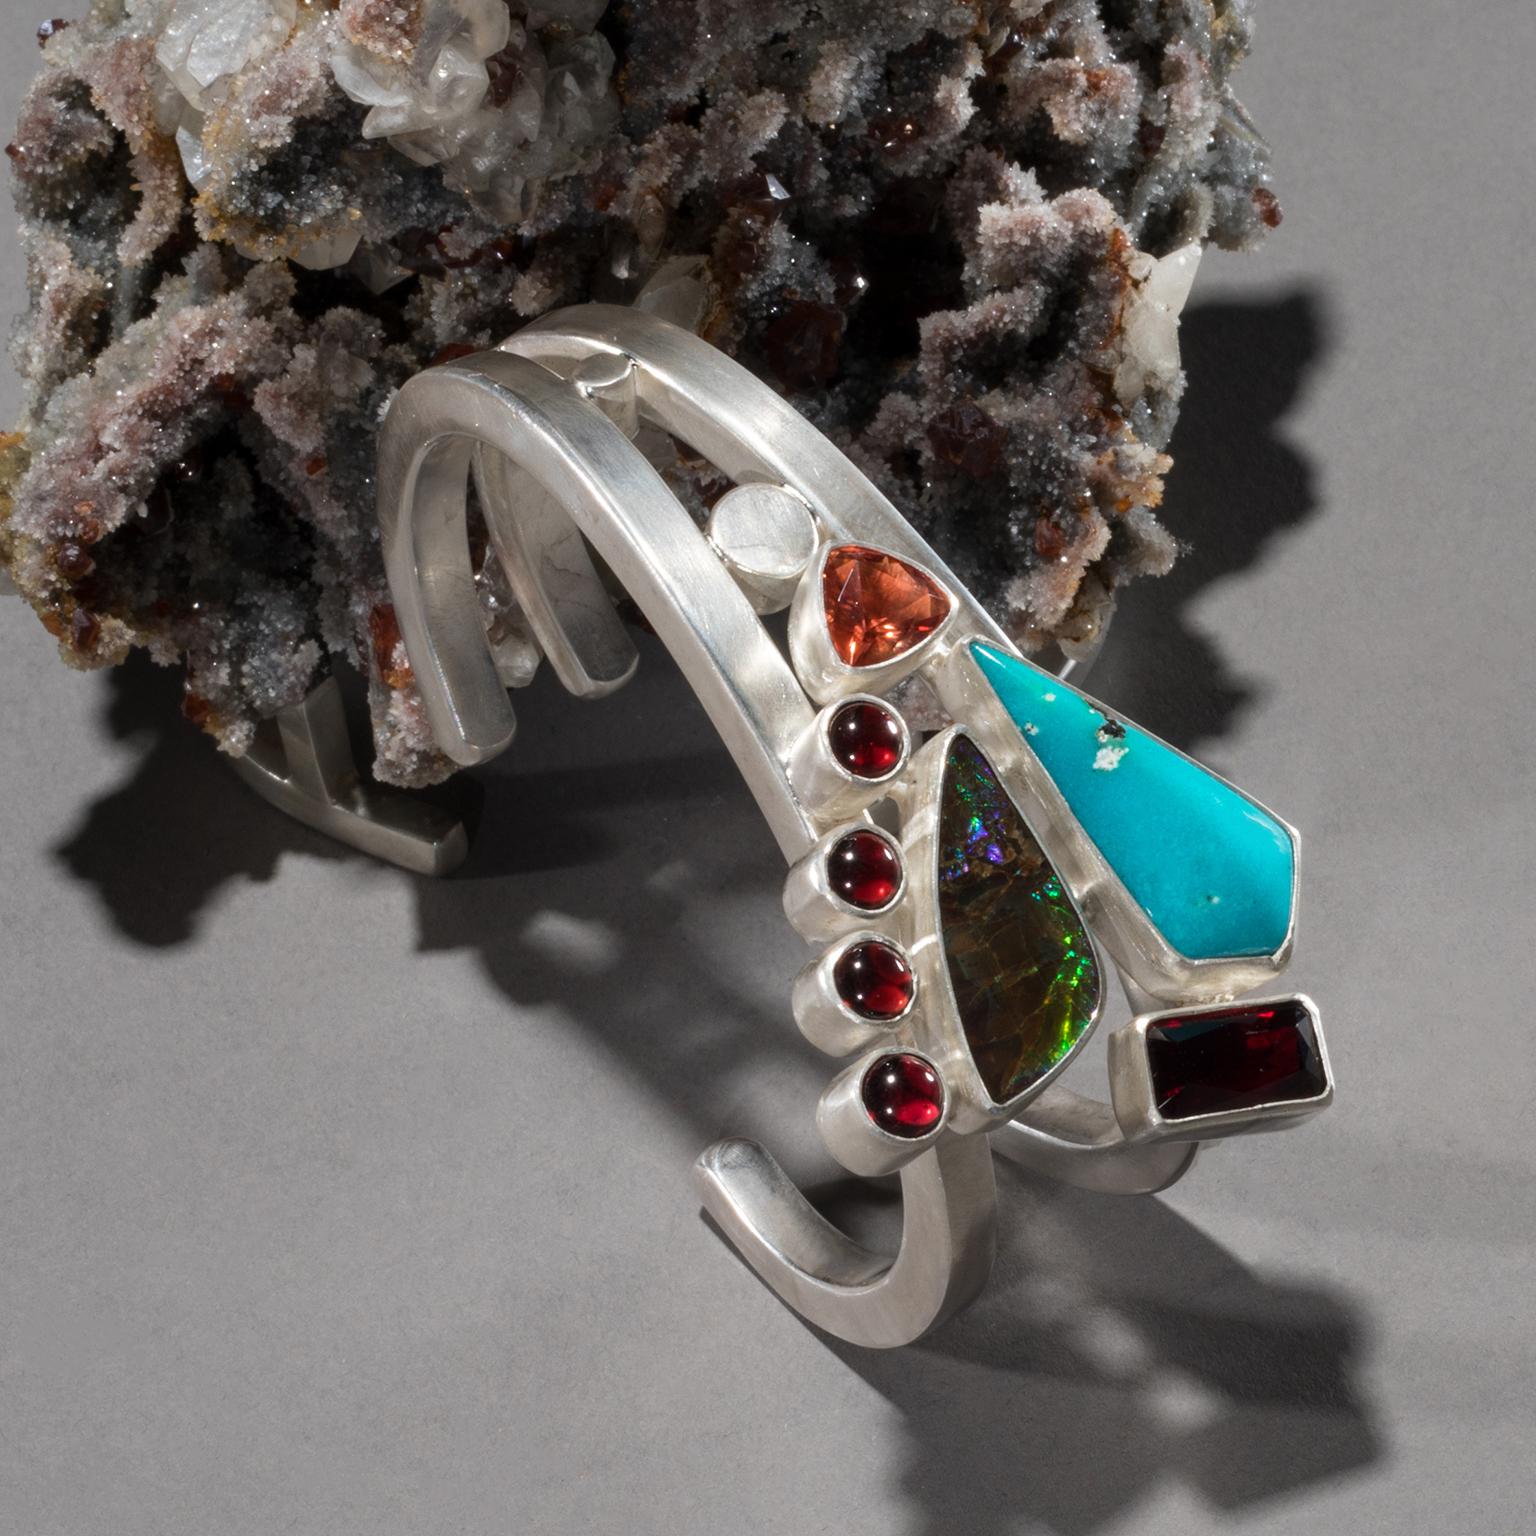 Turquoise cuff on sphalerite with garnet

The arrow-like shape of a piece of sky-blue turquoise sets the tone for Studio Greytak’s Turquoise Cuff on Sphalerite with Garnet. Beside the powerful warrior stone, turquoise, sit iridescent ammolite and